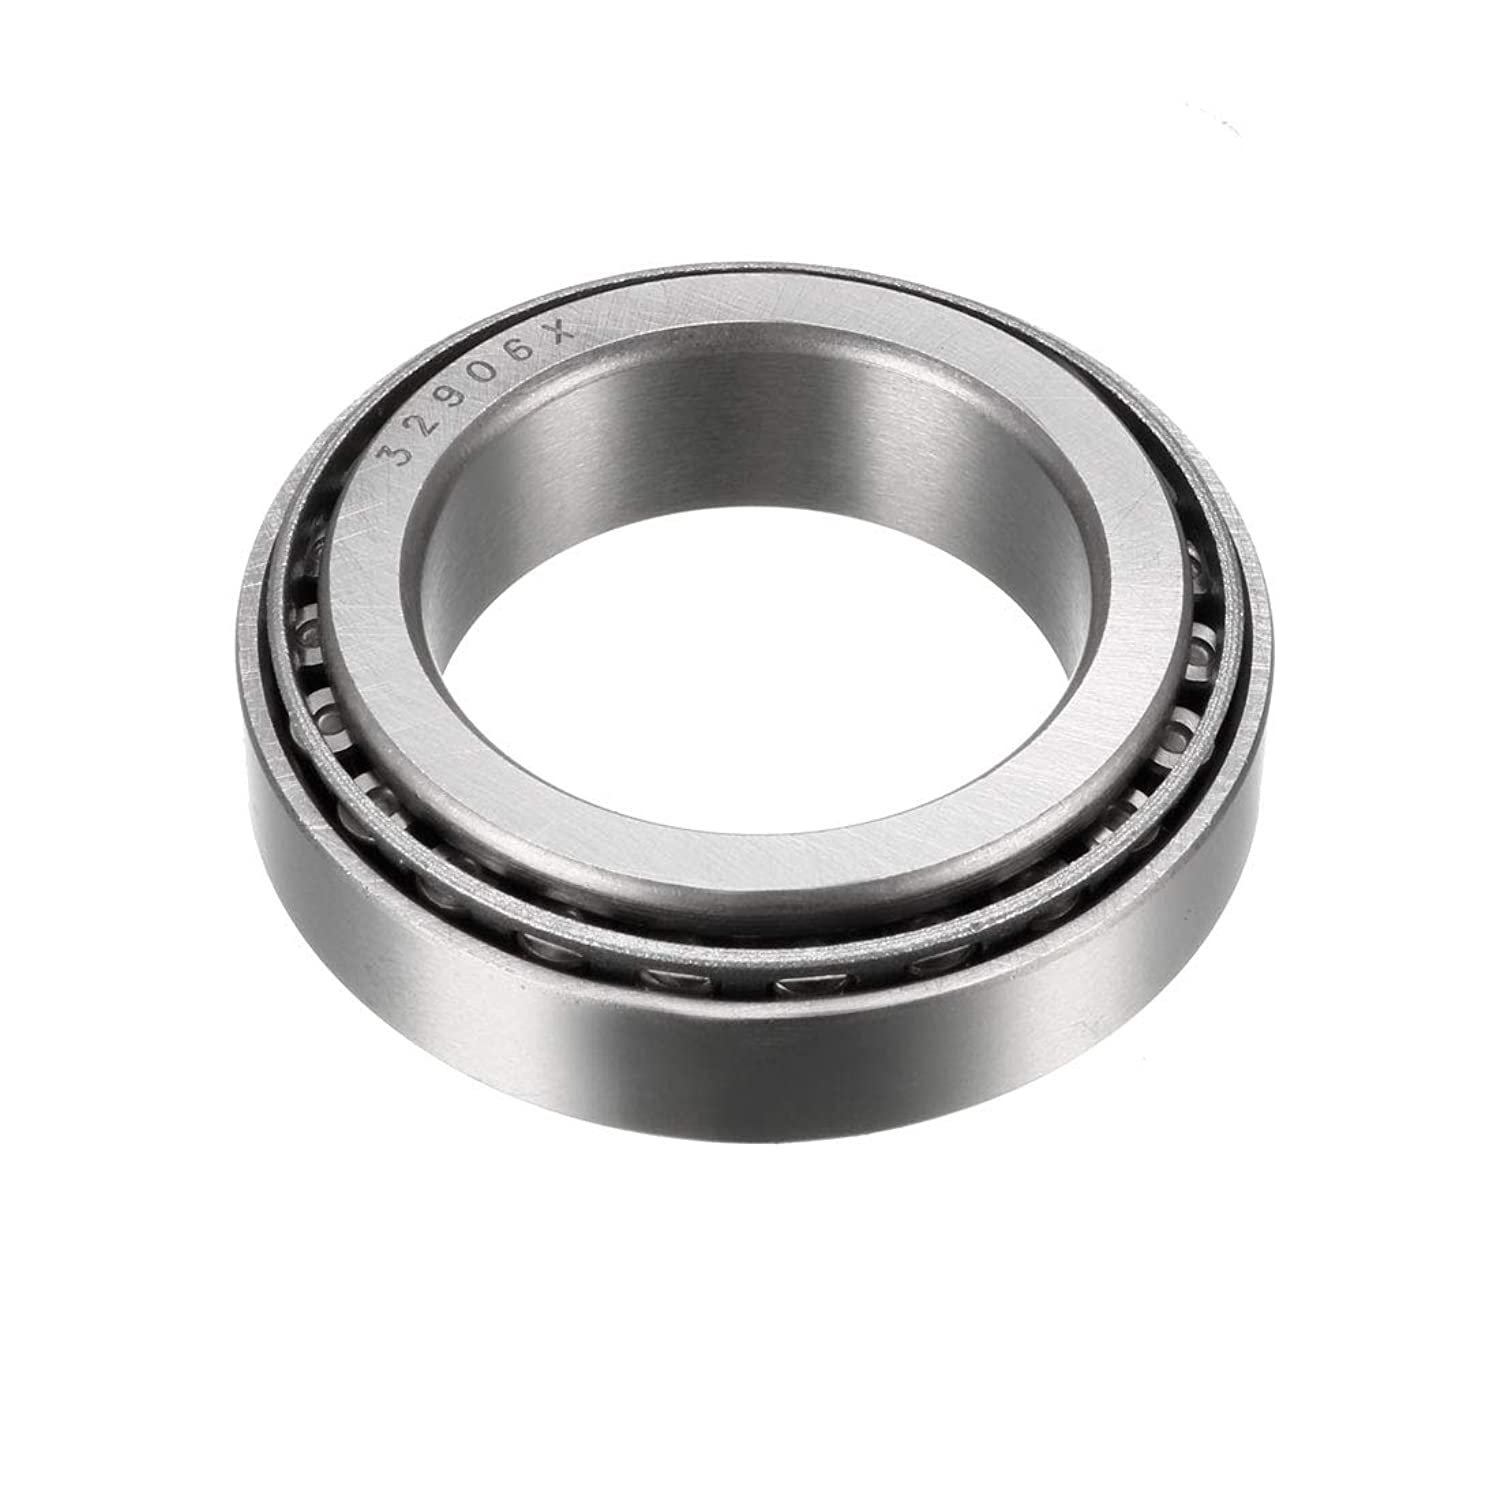 uxcell 32906x Tapered Roller Bearing Cone and Cup Set 30mm Bore 47mm O.D. 12mm Width